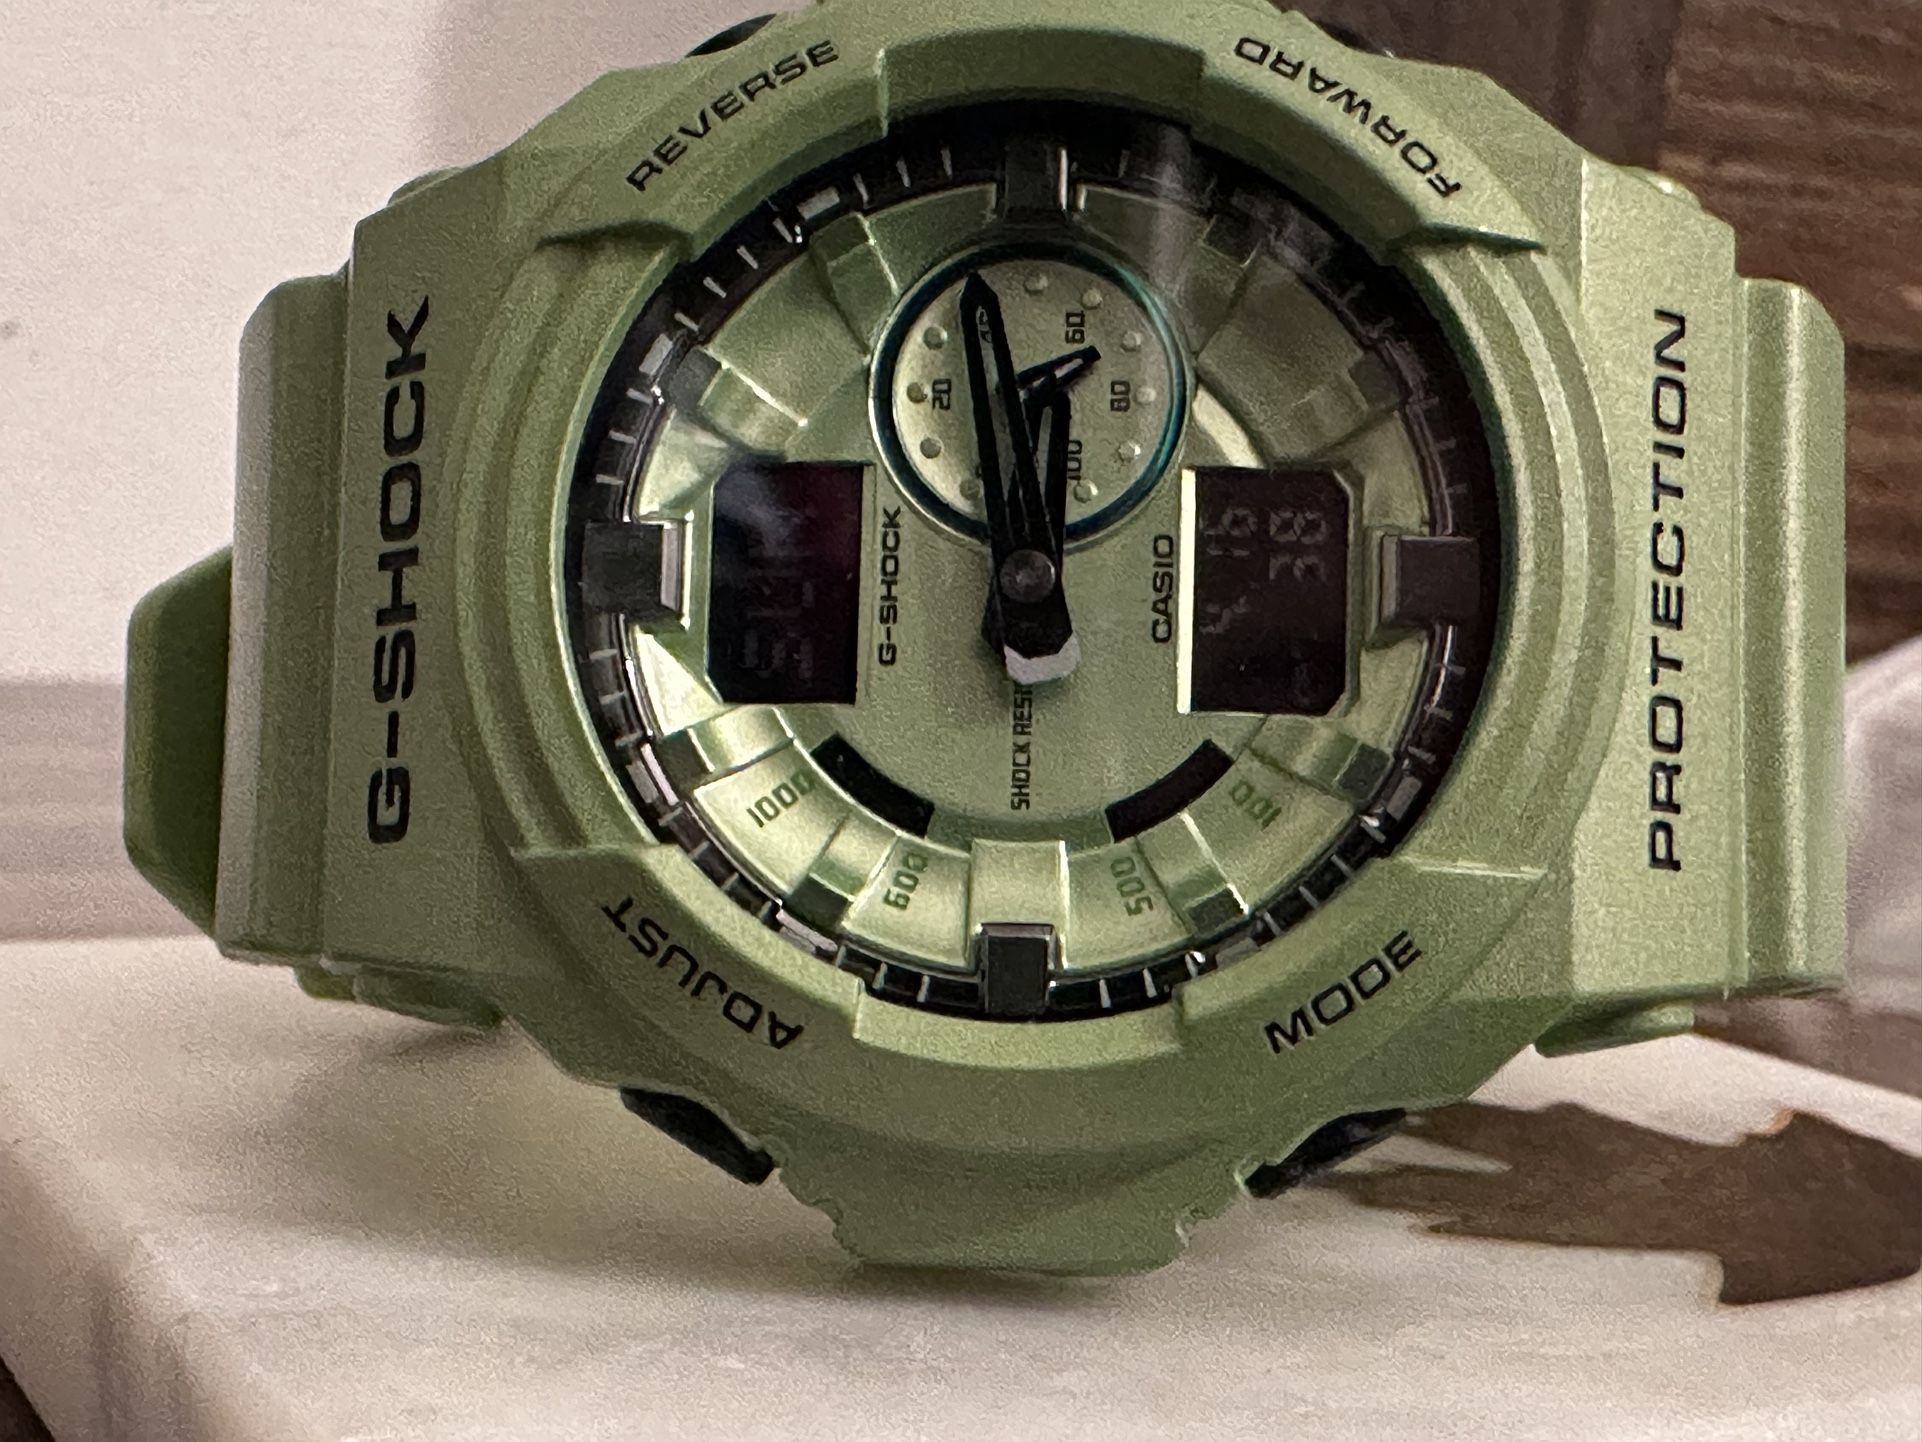 Limited Edition G-shock